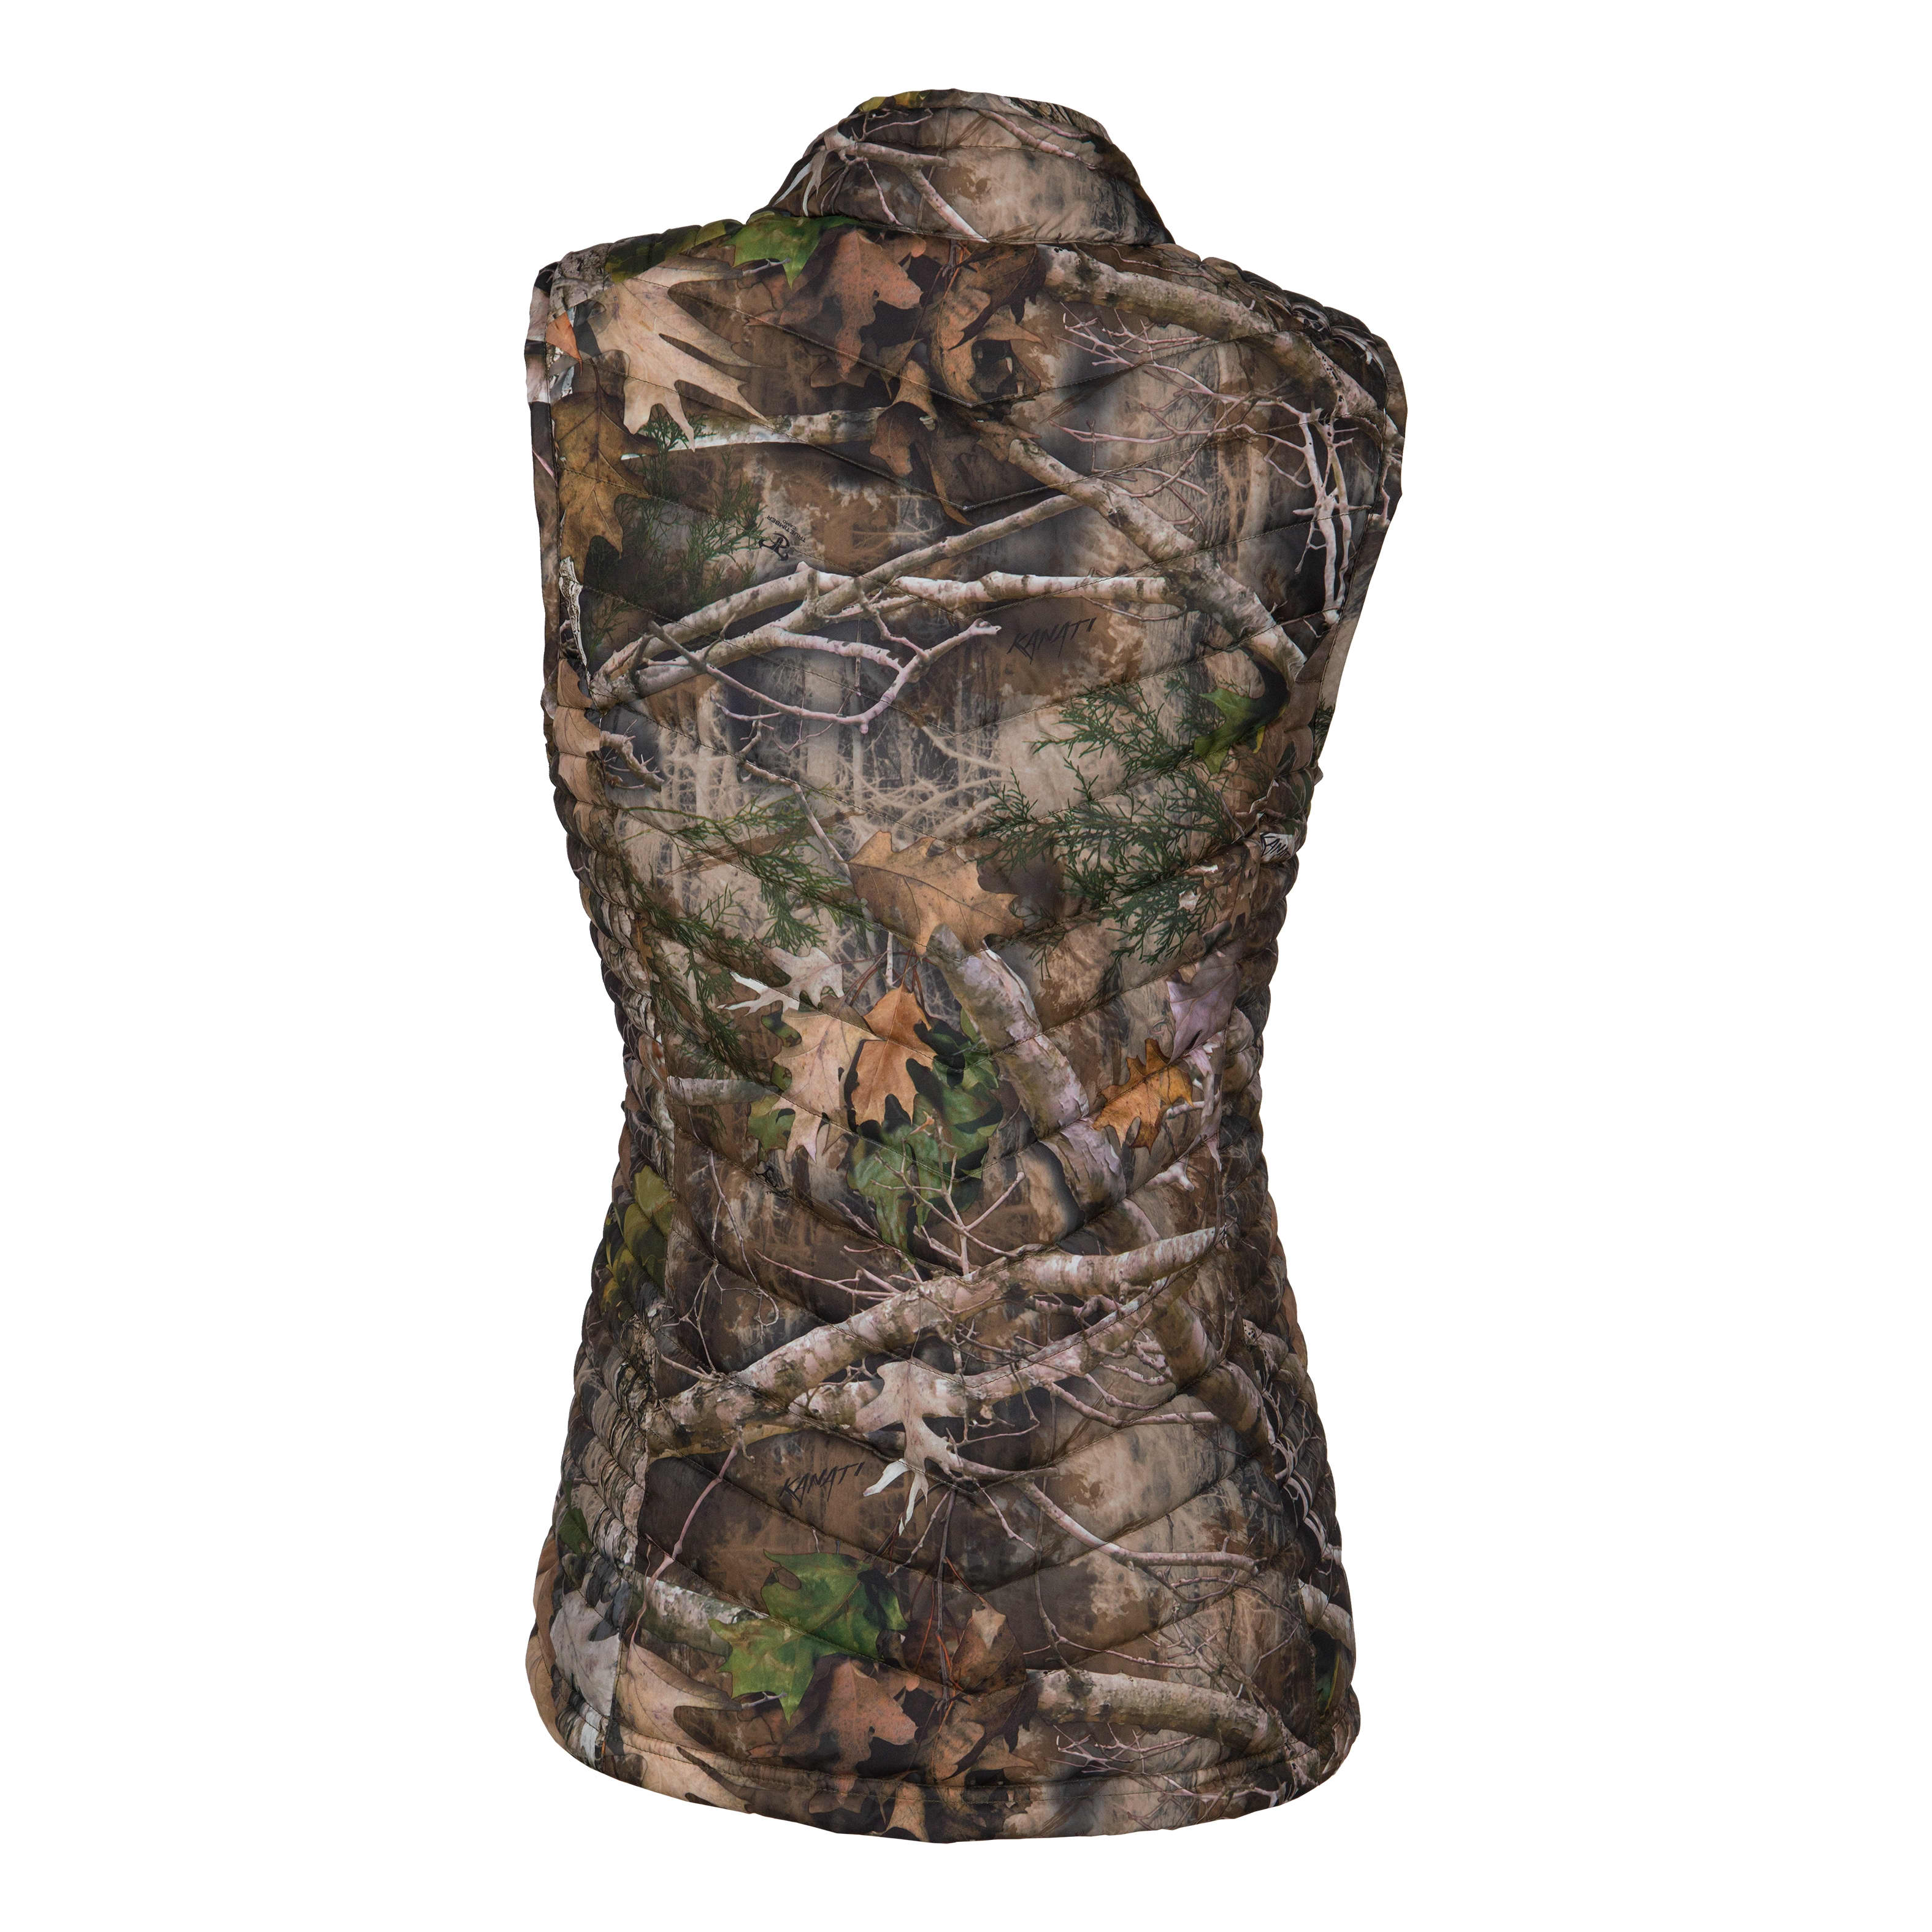 SHE Outdoor Women’s Insulated Puffy Camo Vest - Cabelas - SHE 